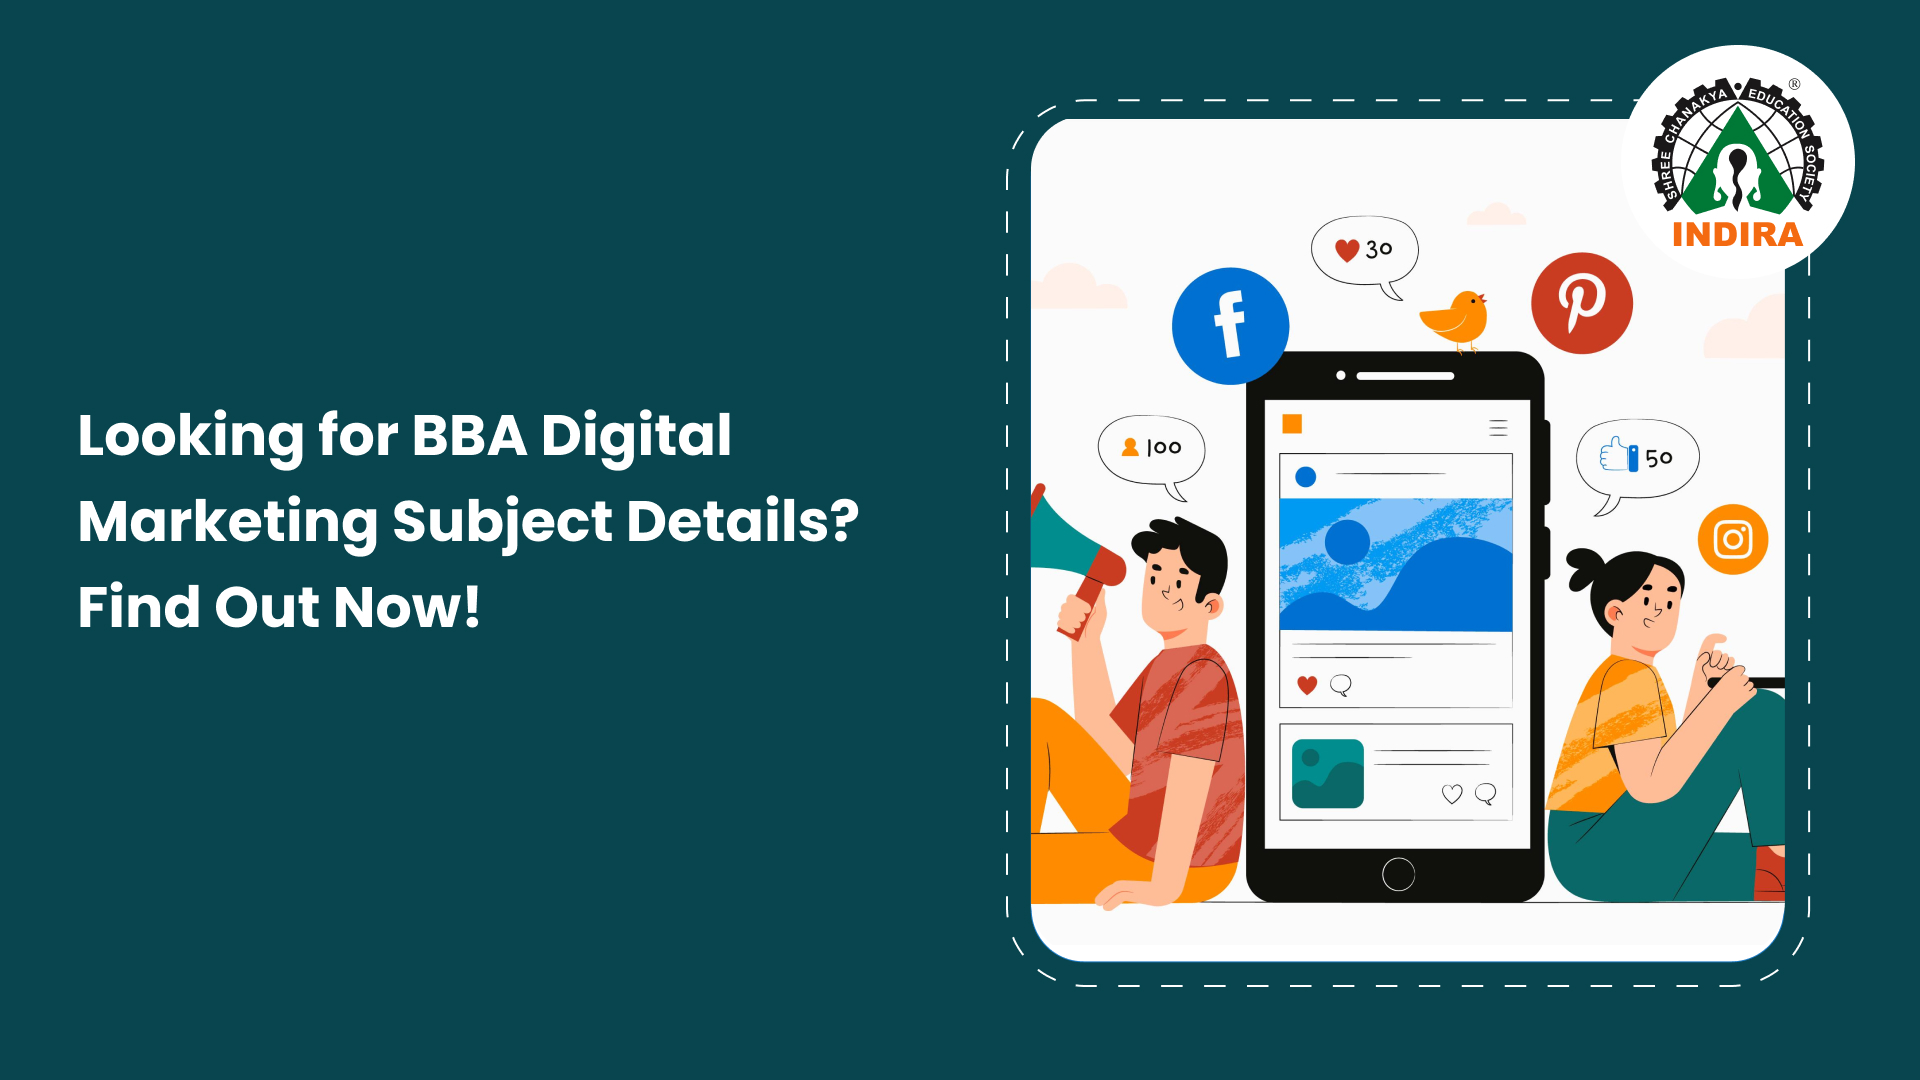  Looking for BBA Digital Marketing Subject Details? Find Out Now!